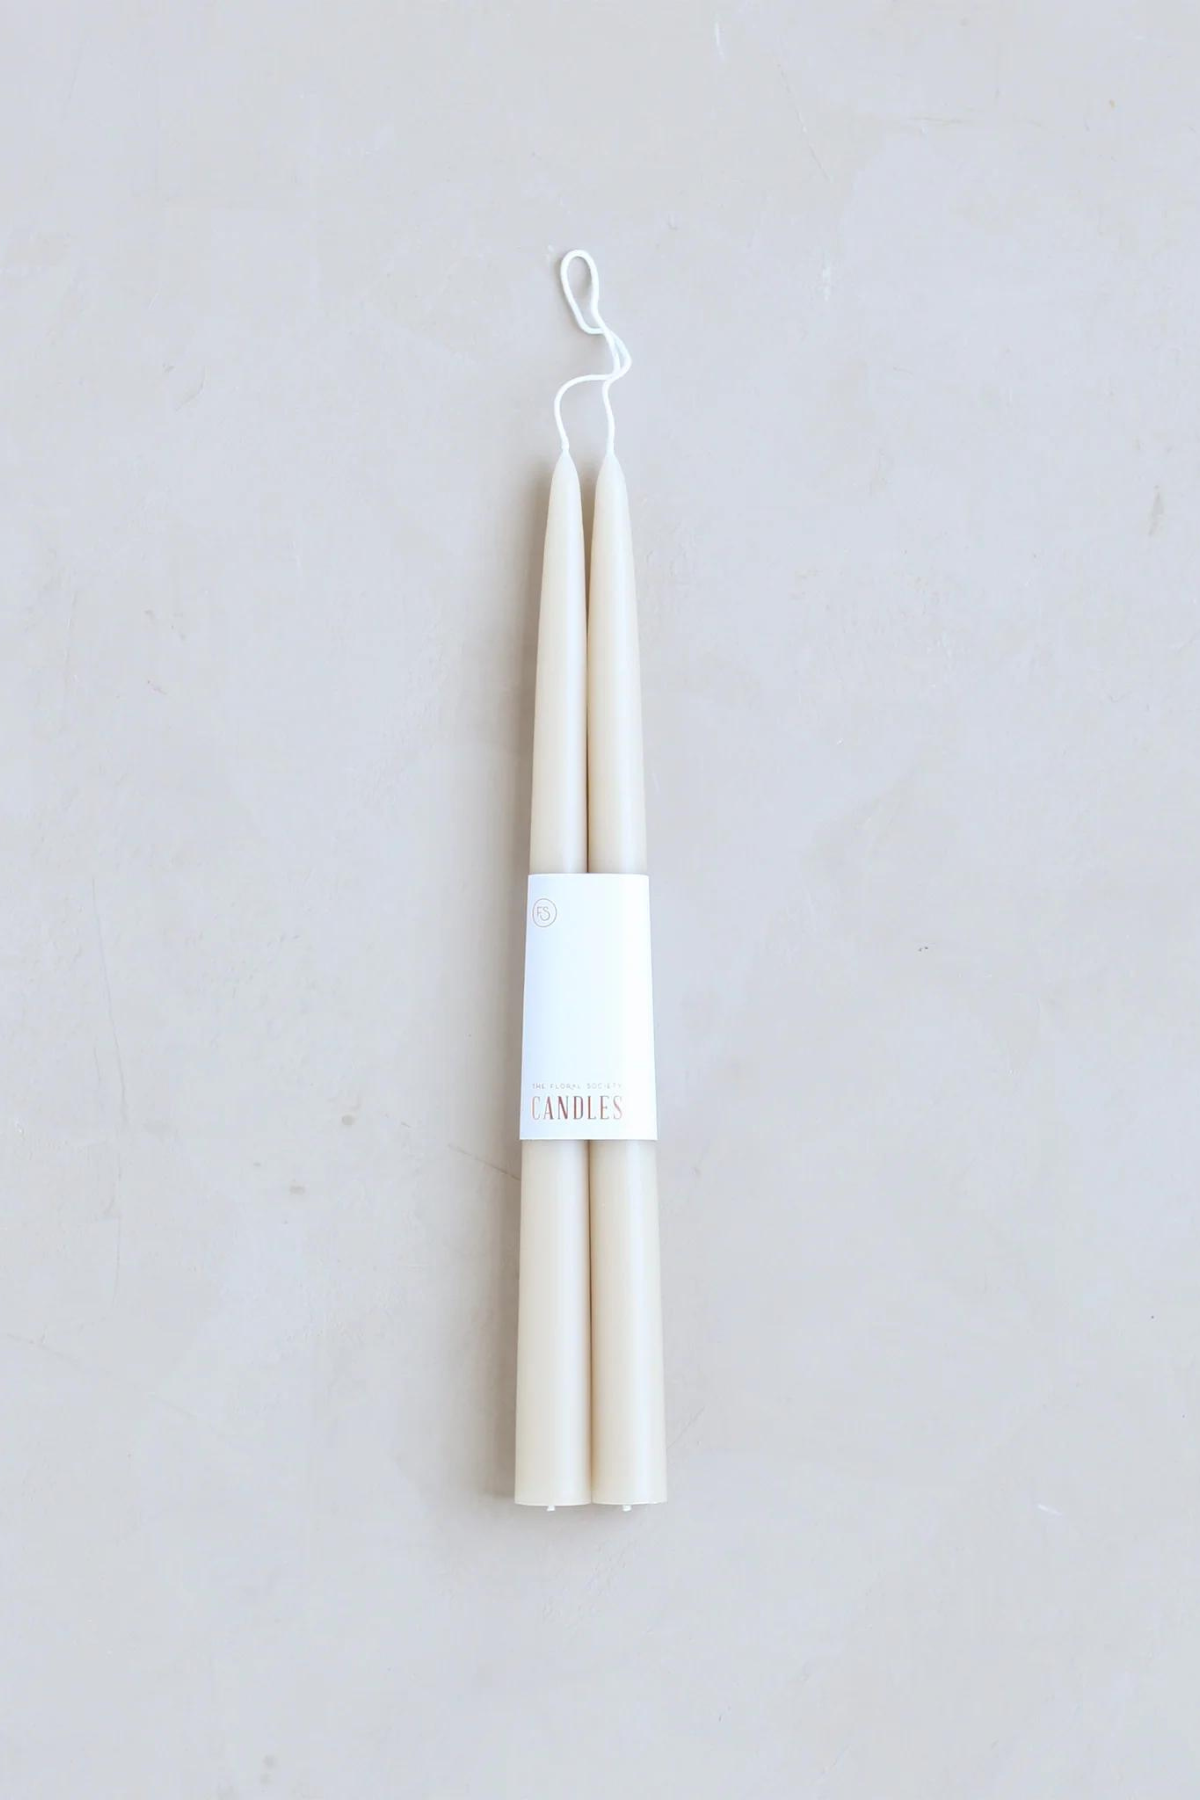 12" Dipped Taper Candles in Parchment